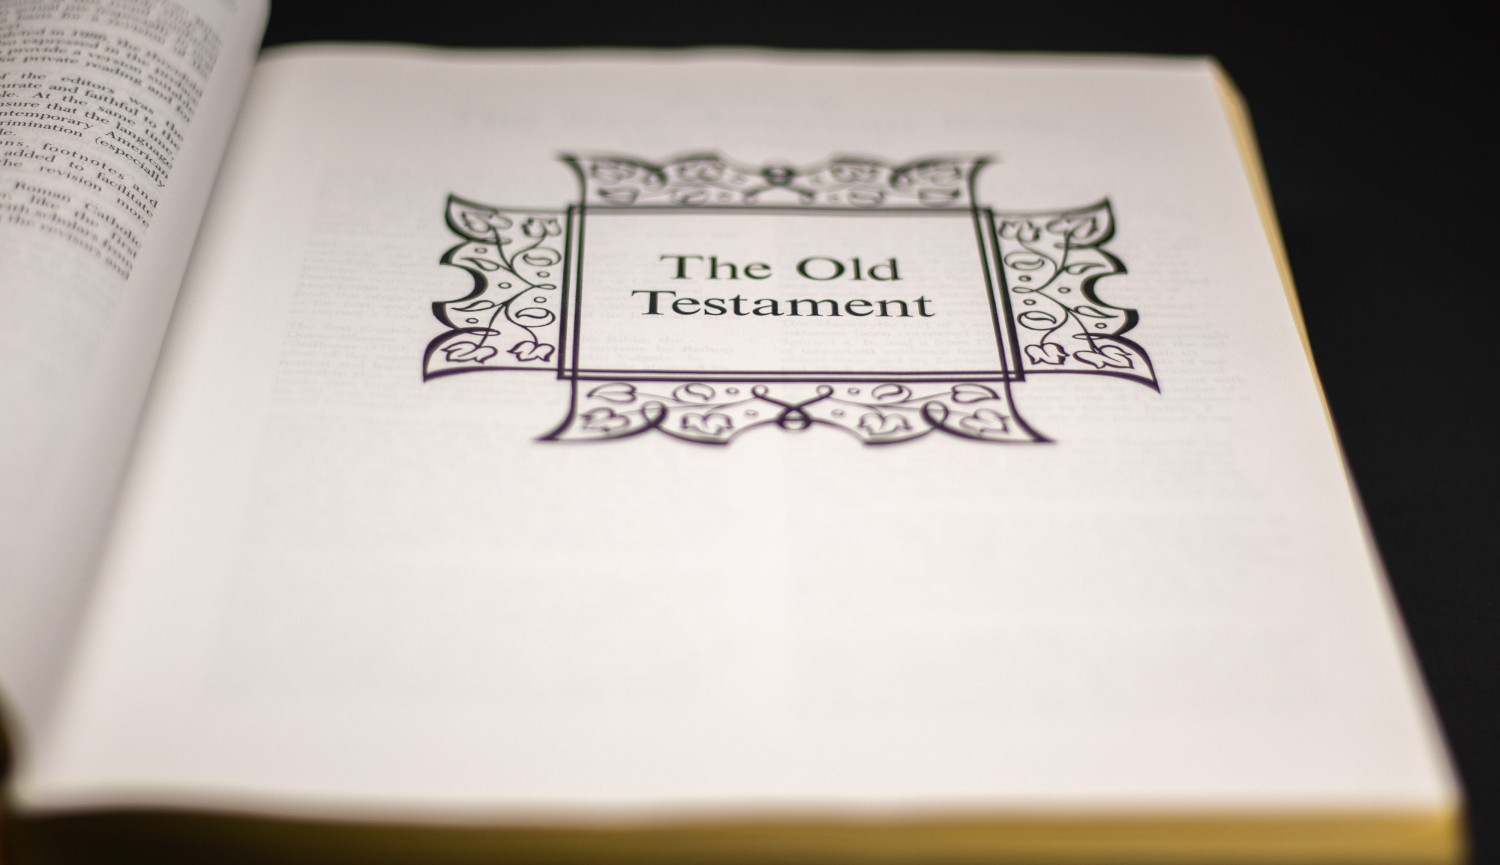 What is the Old Testament?